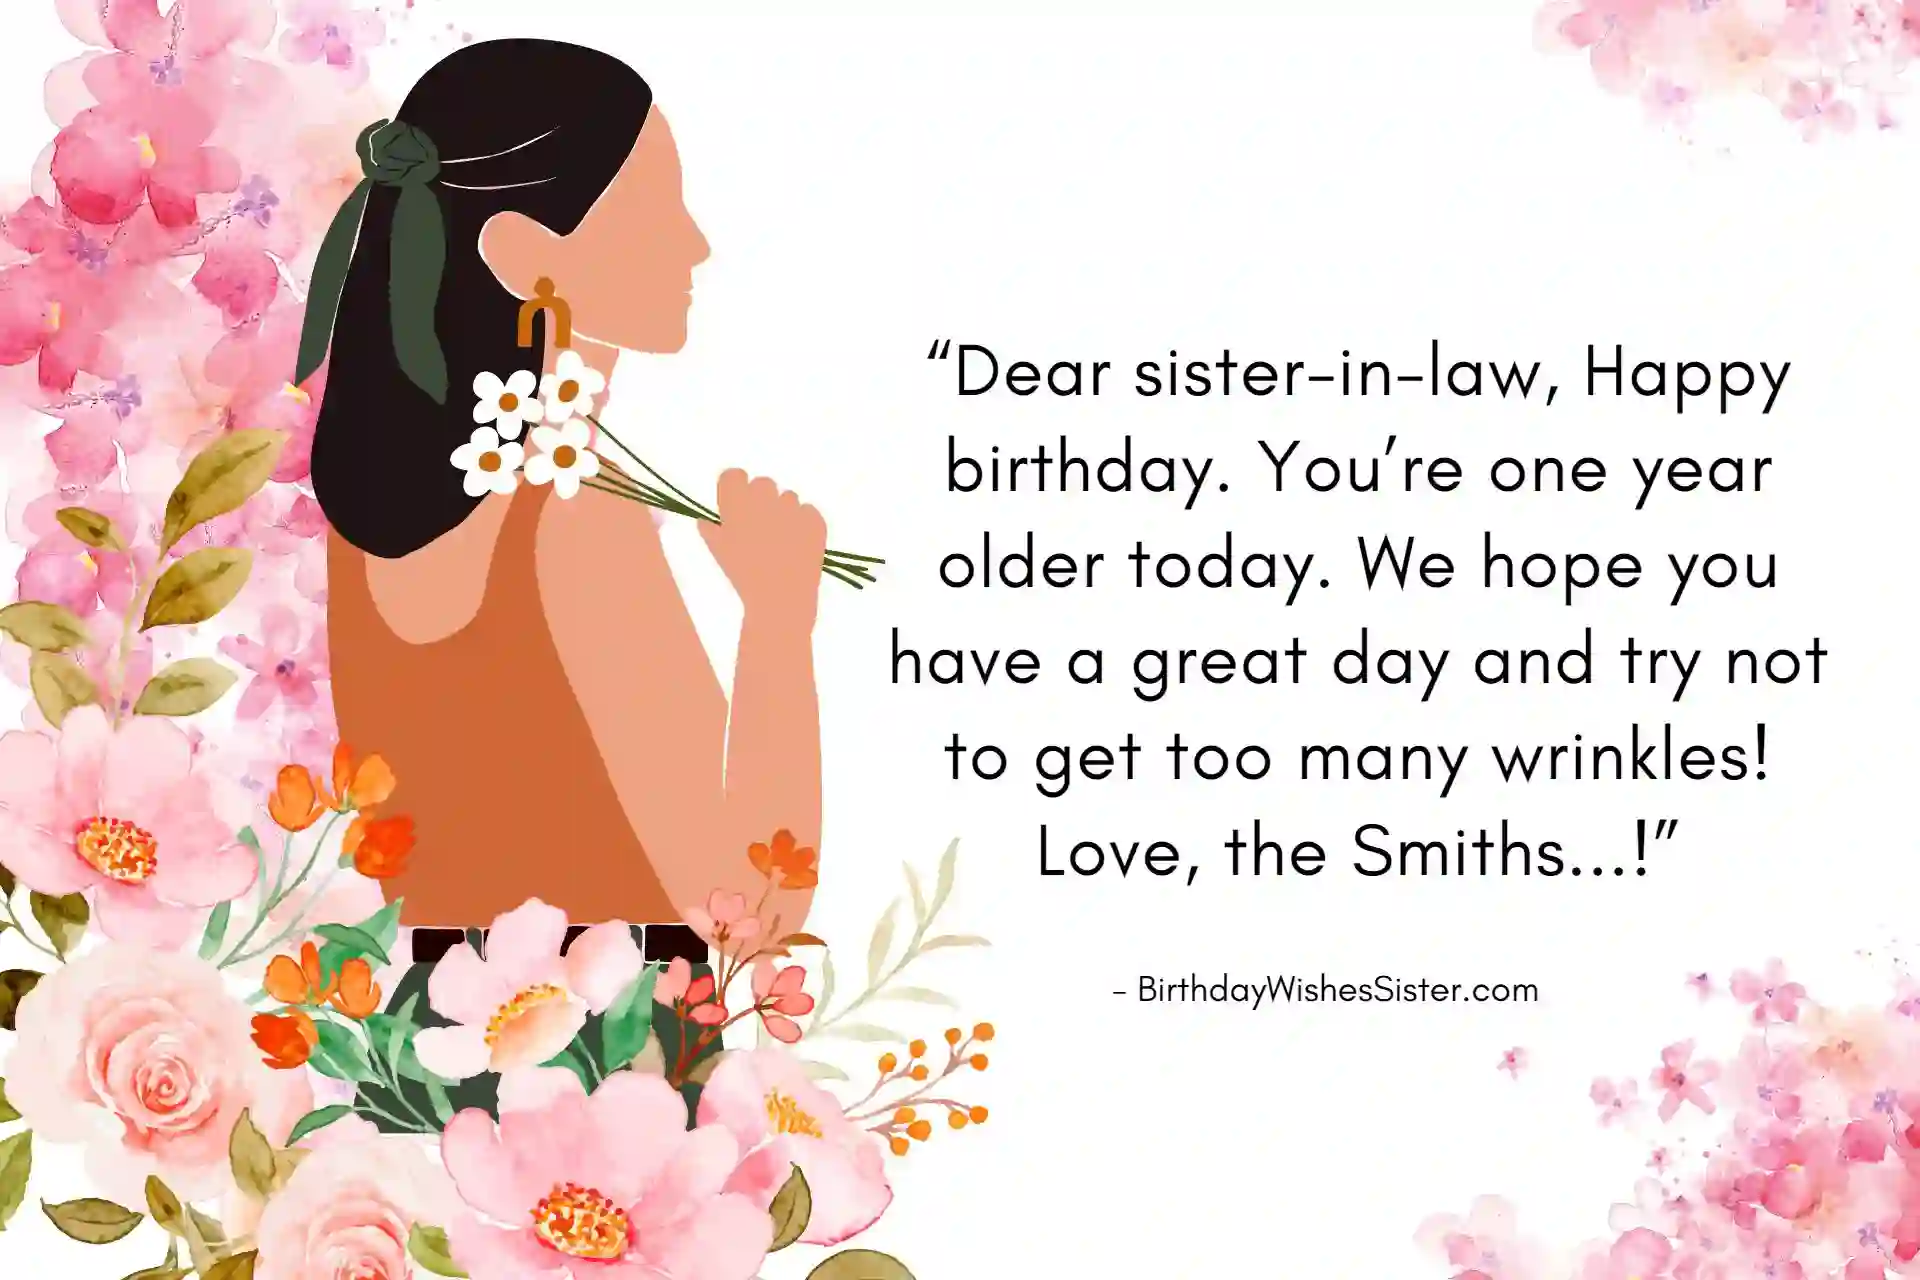 Frequently Asked Questions for Christian Birthday Cards for Sister-in-law